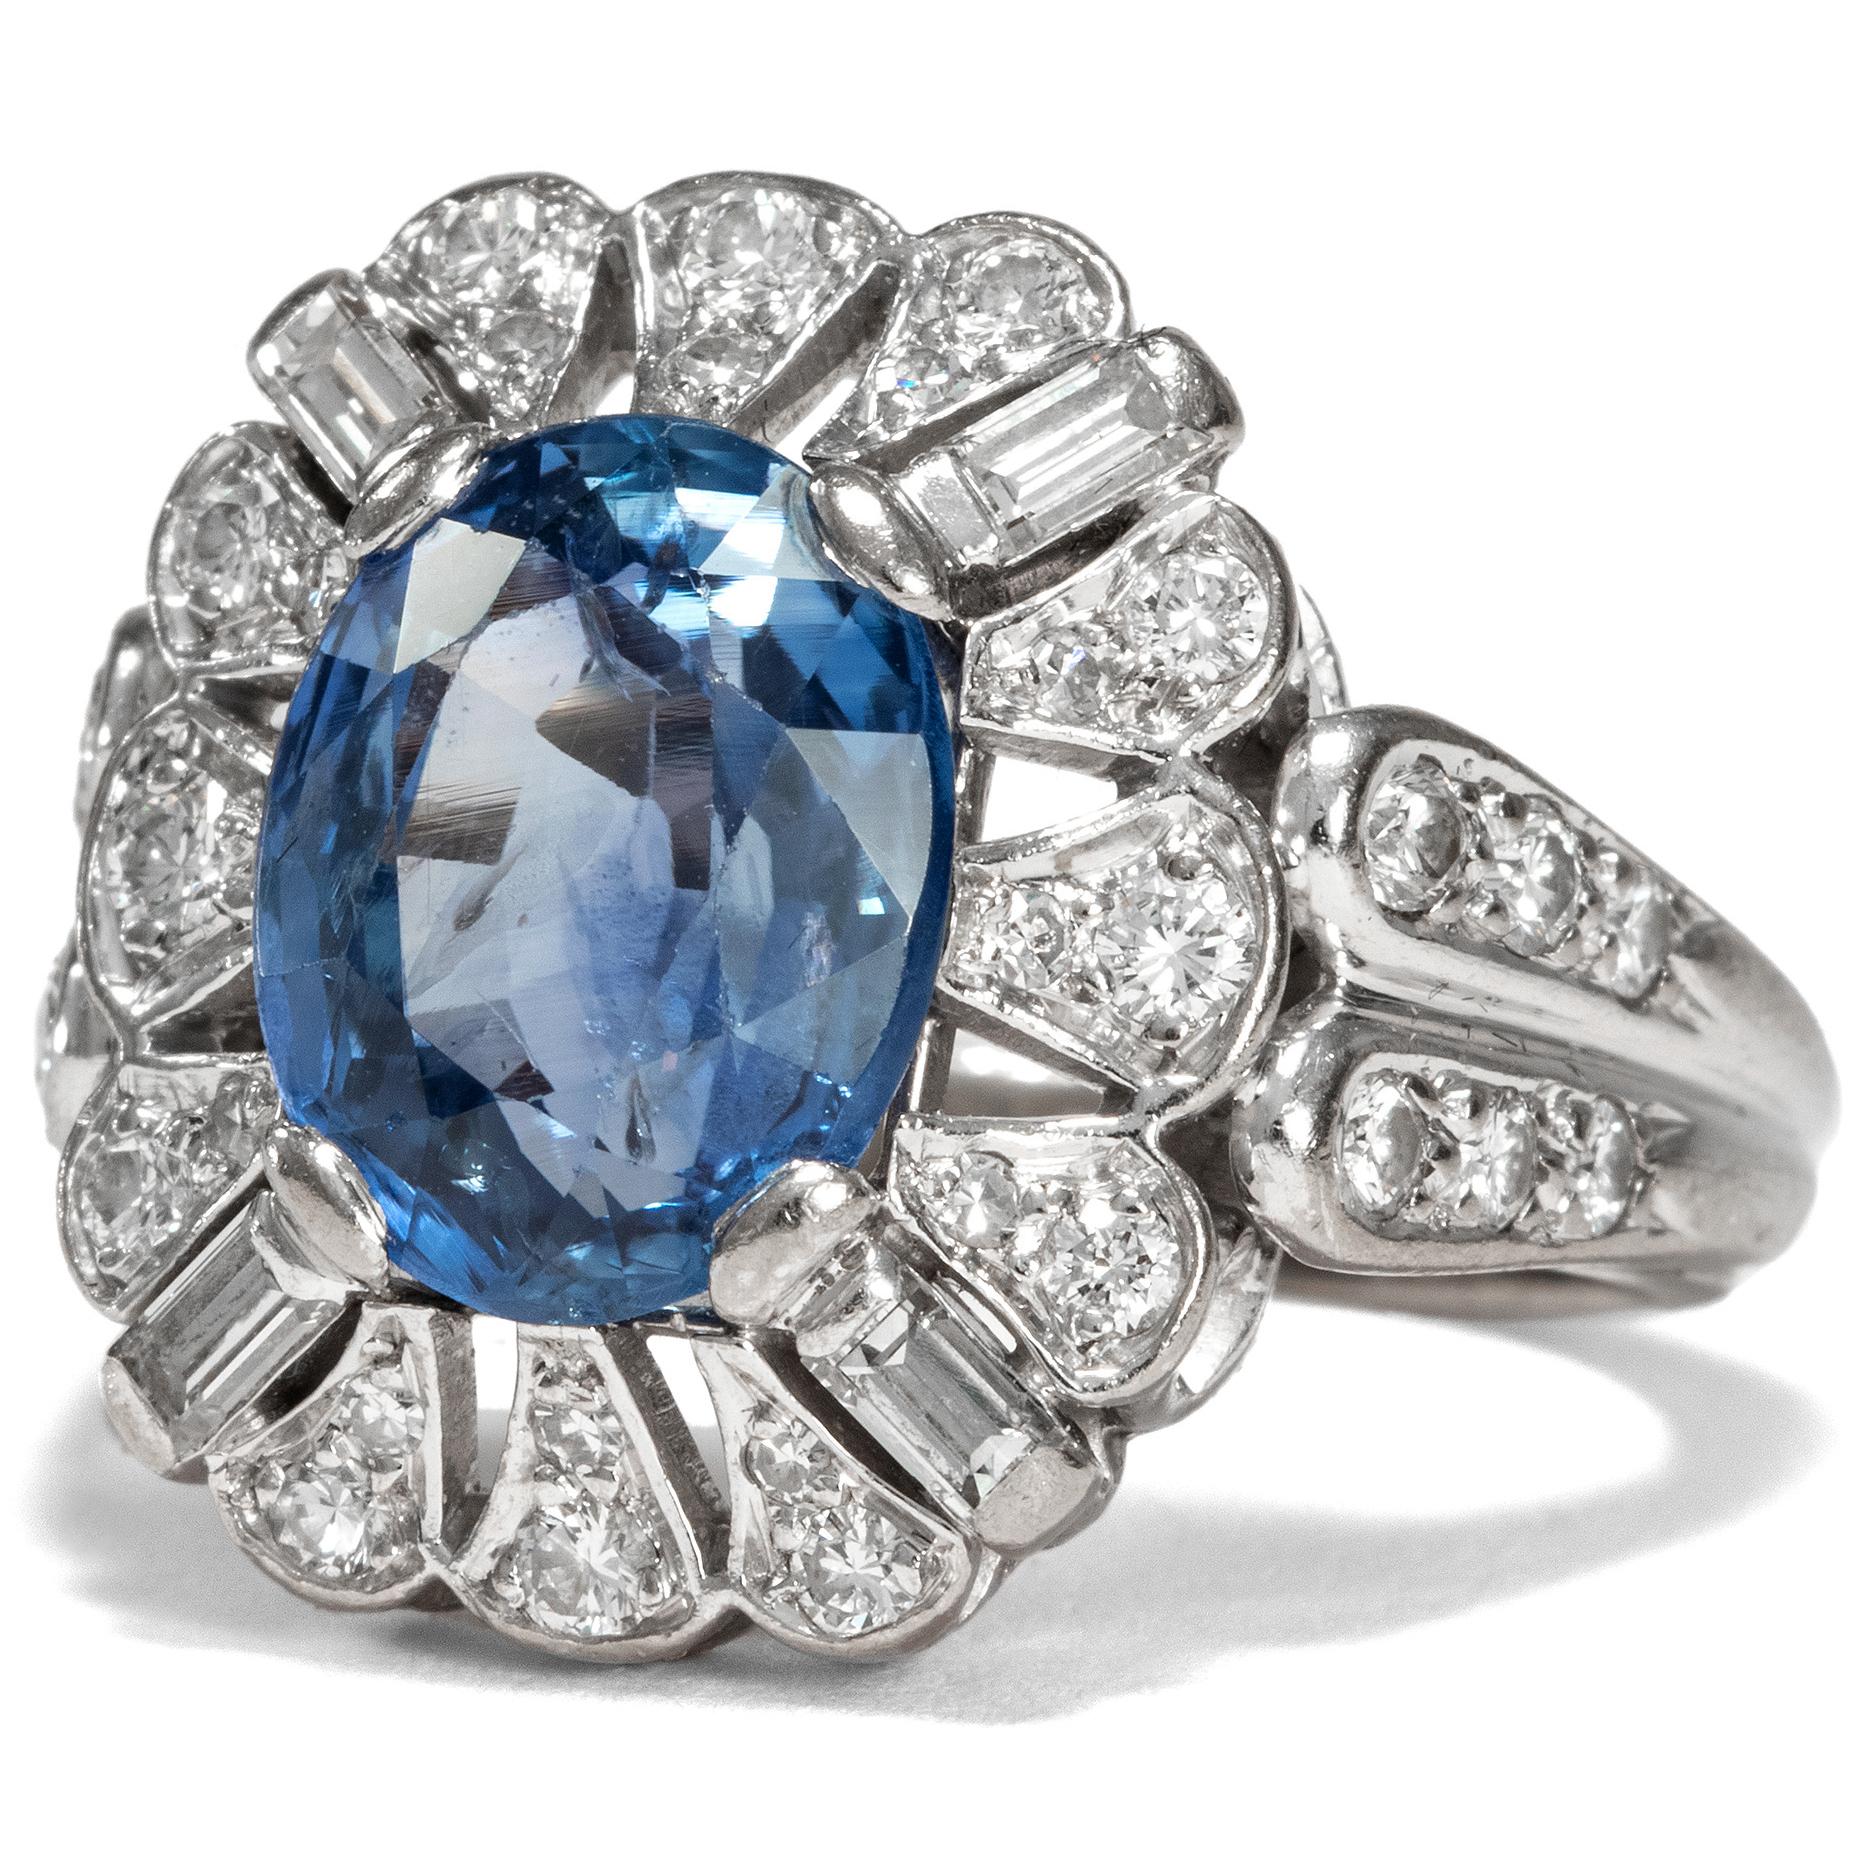 Modern Vintage circa 1970 5.8 Carat Blue Sapphire and Diamond Cocktail Cluster Ring